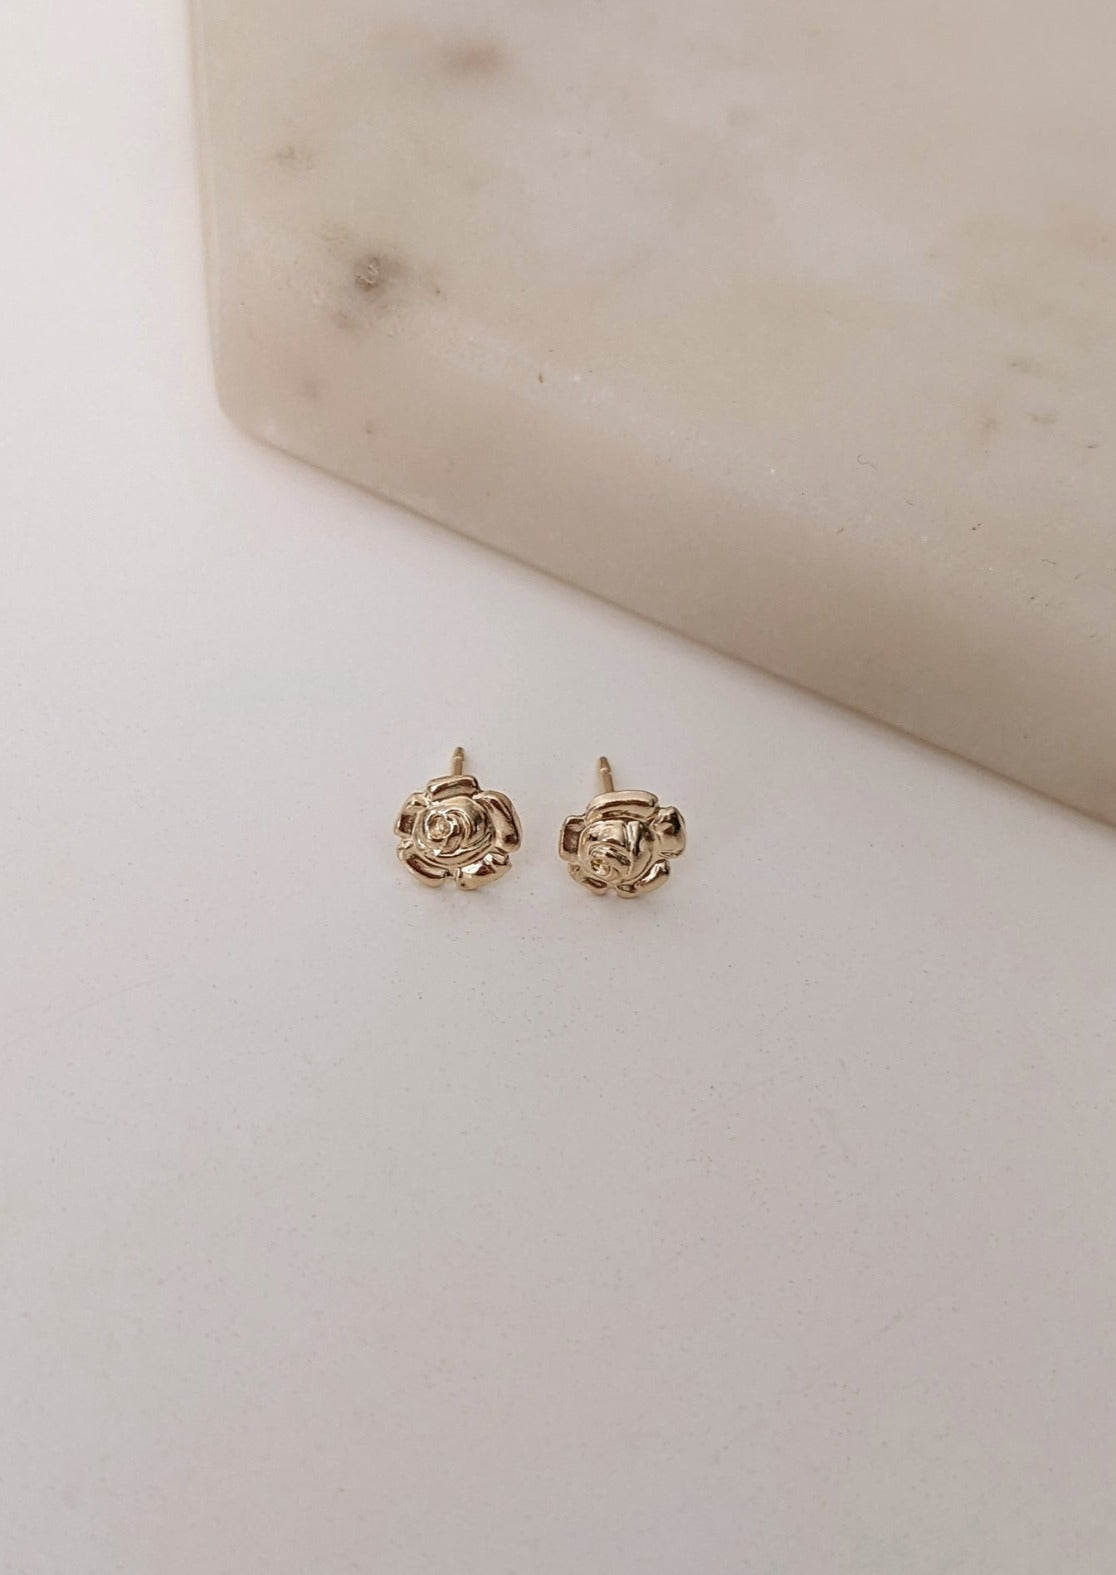 Rose Stud Earrings by Layer the Love